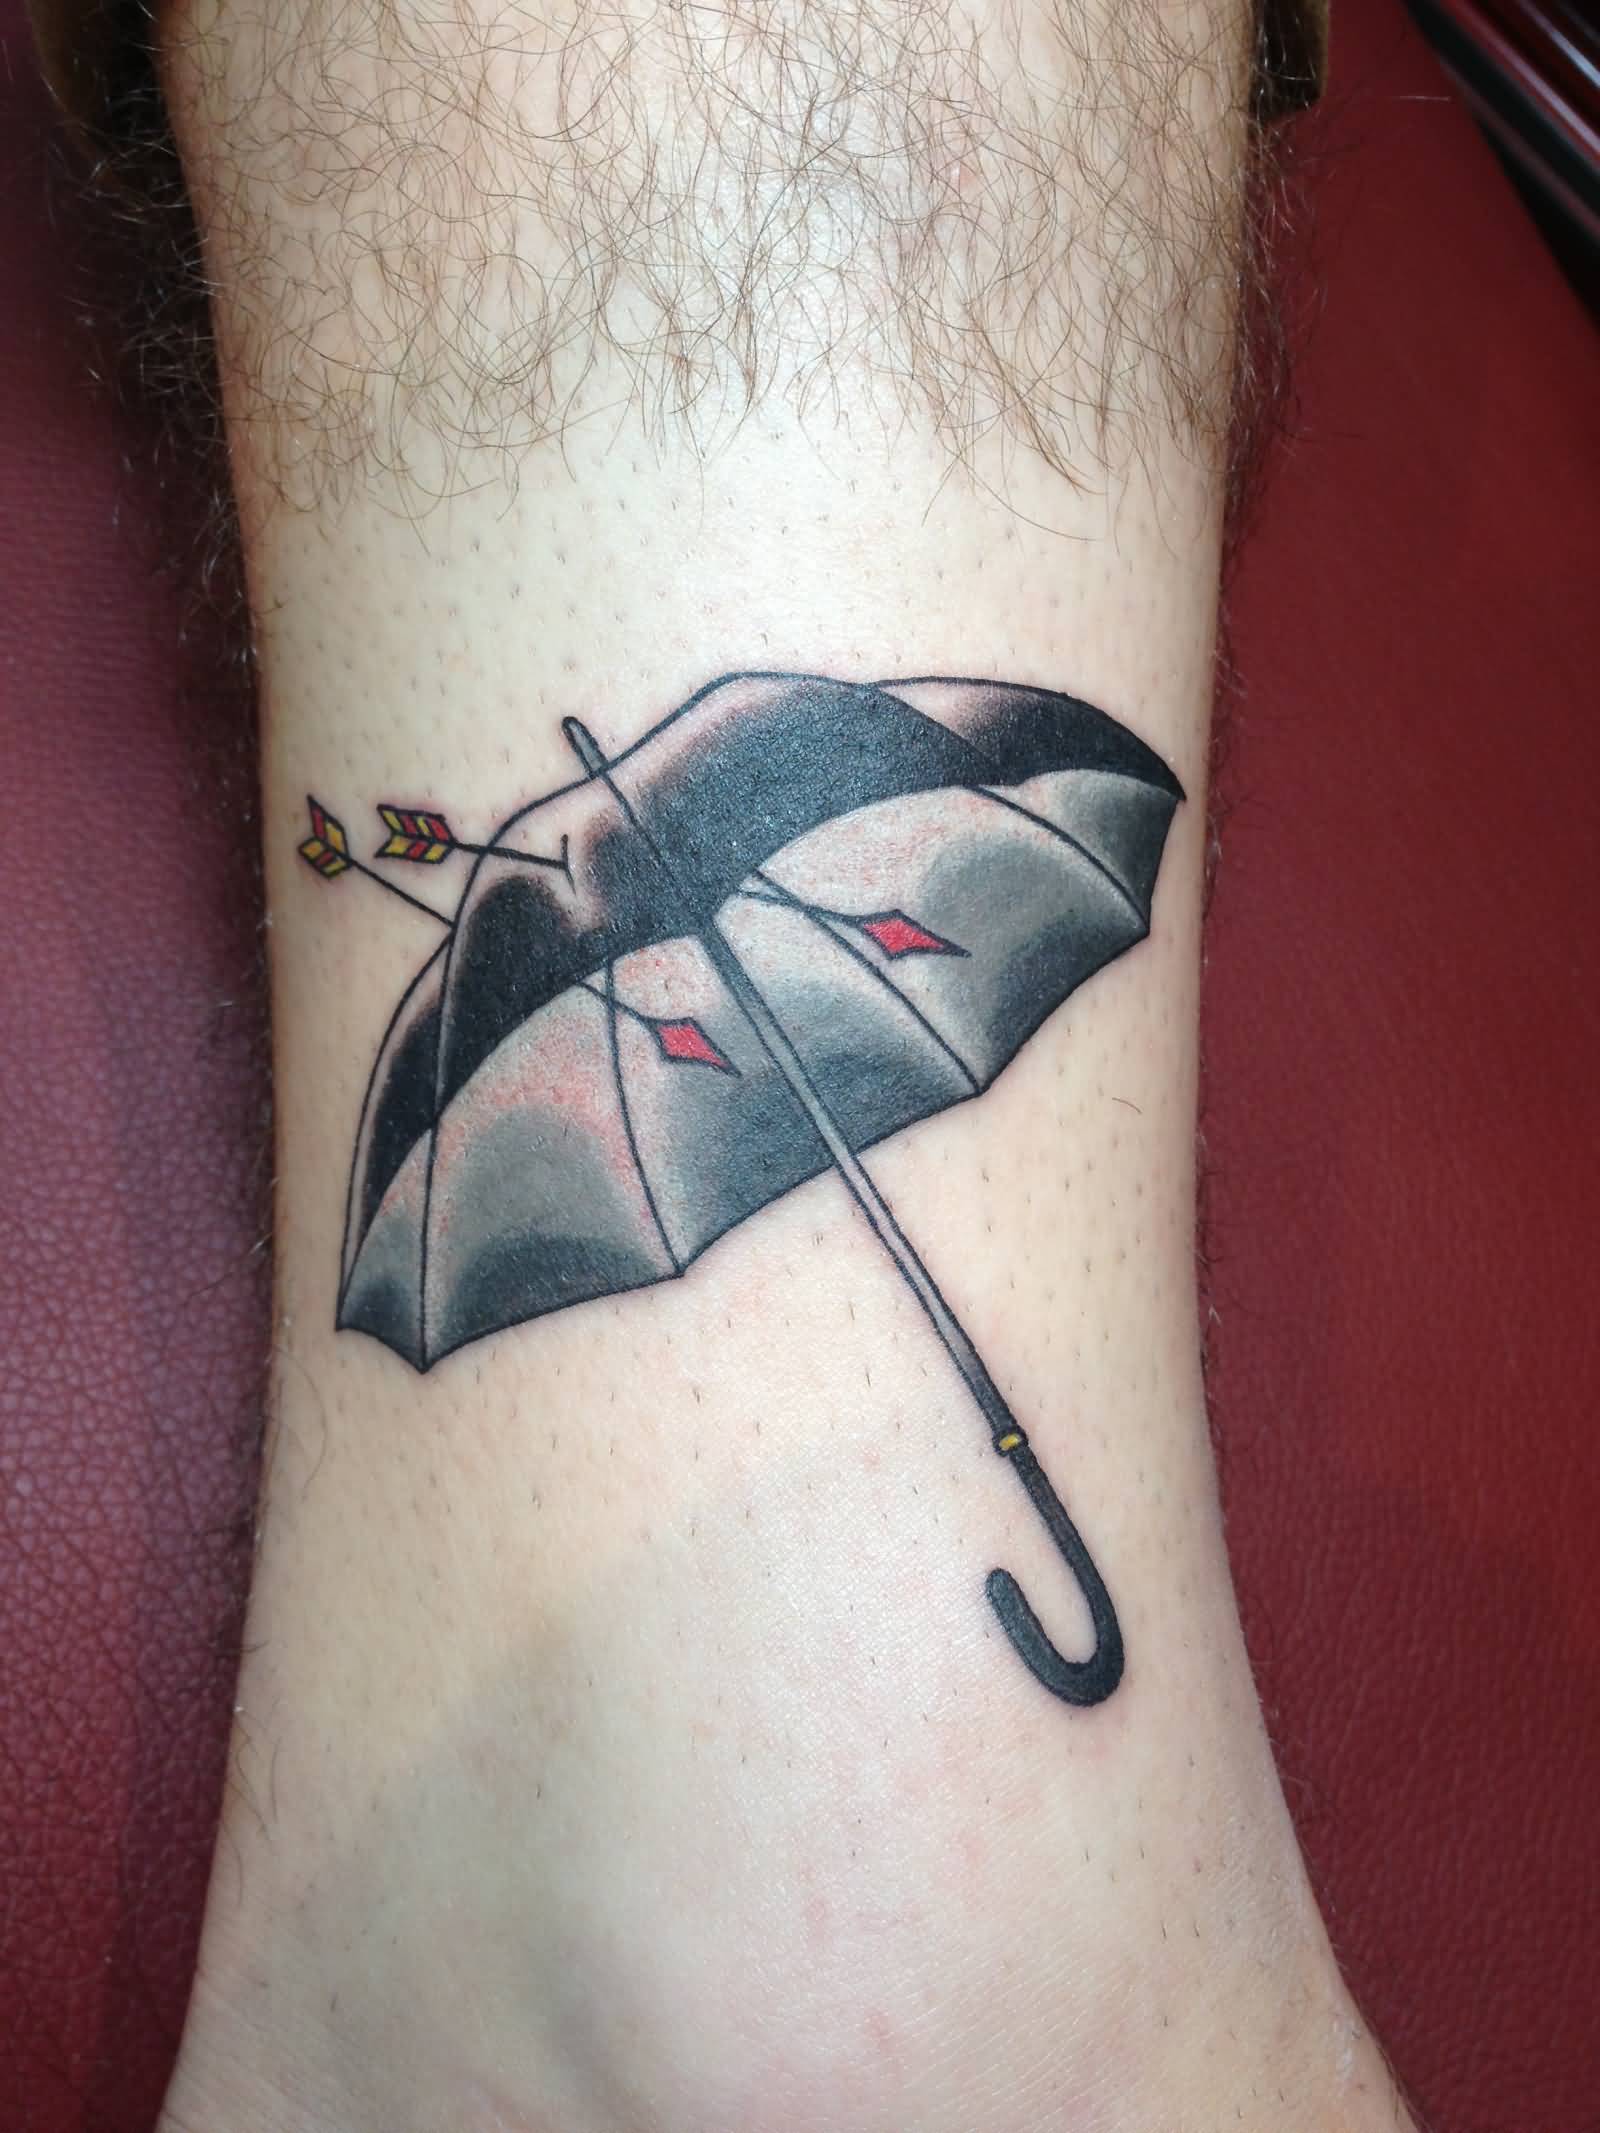 Umbrella Tattoo Designs, Ideas and Meaning | Tattoos For You